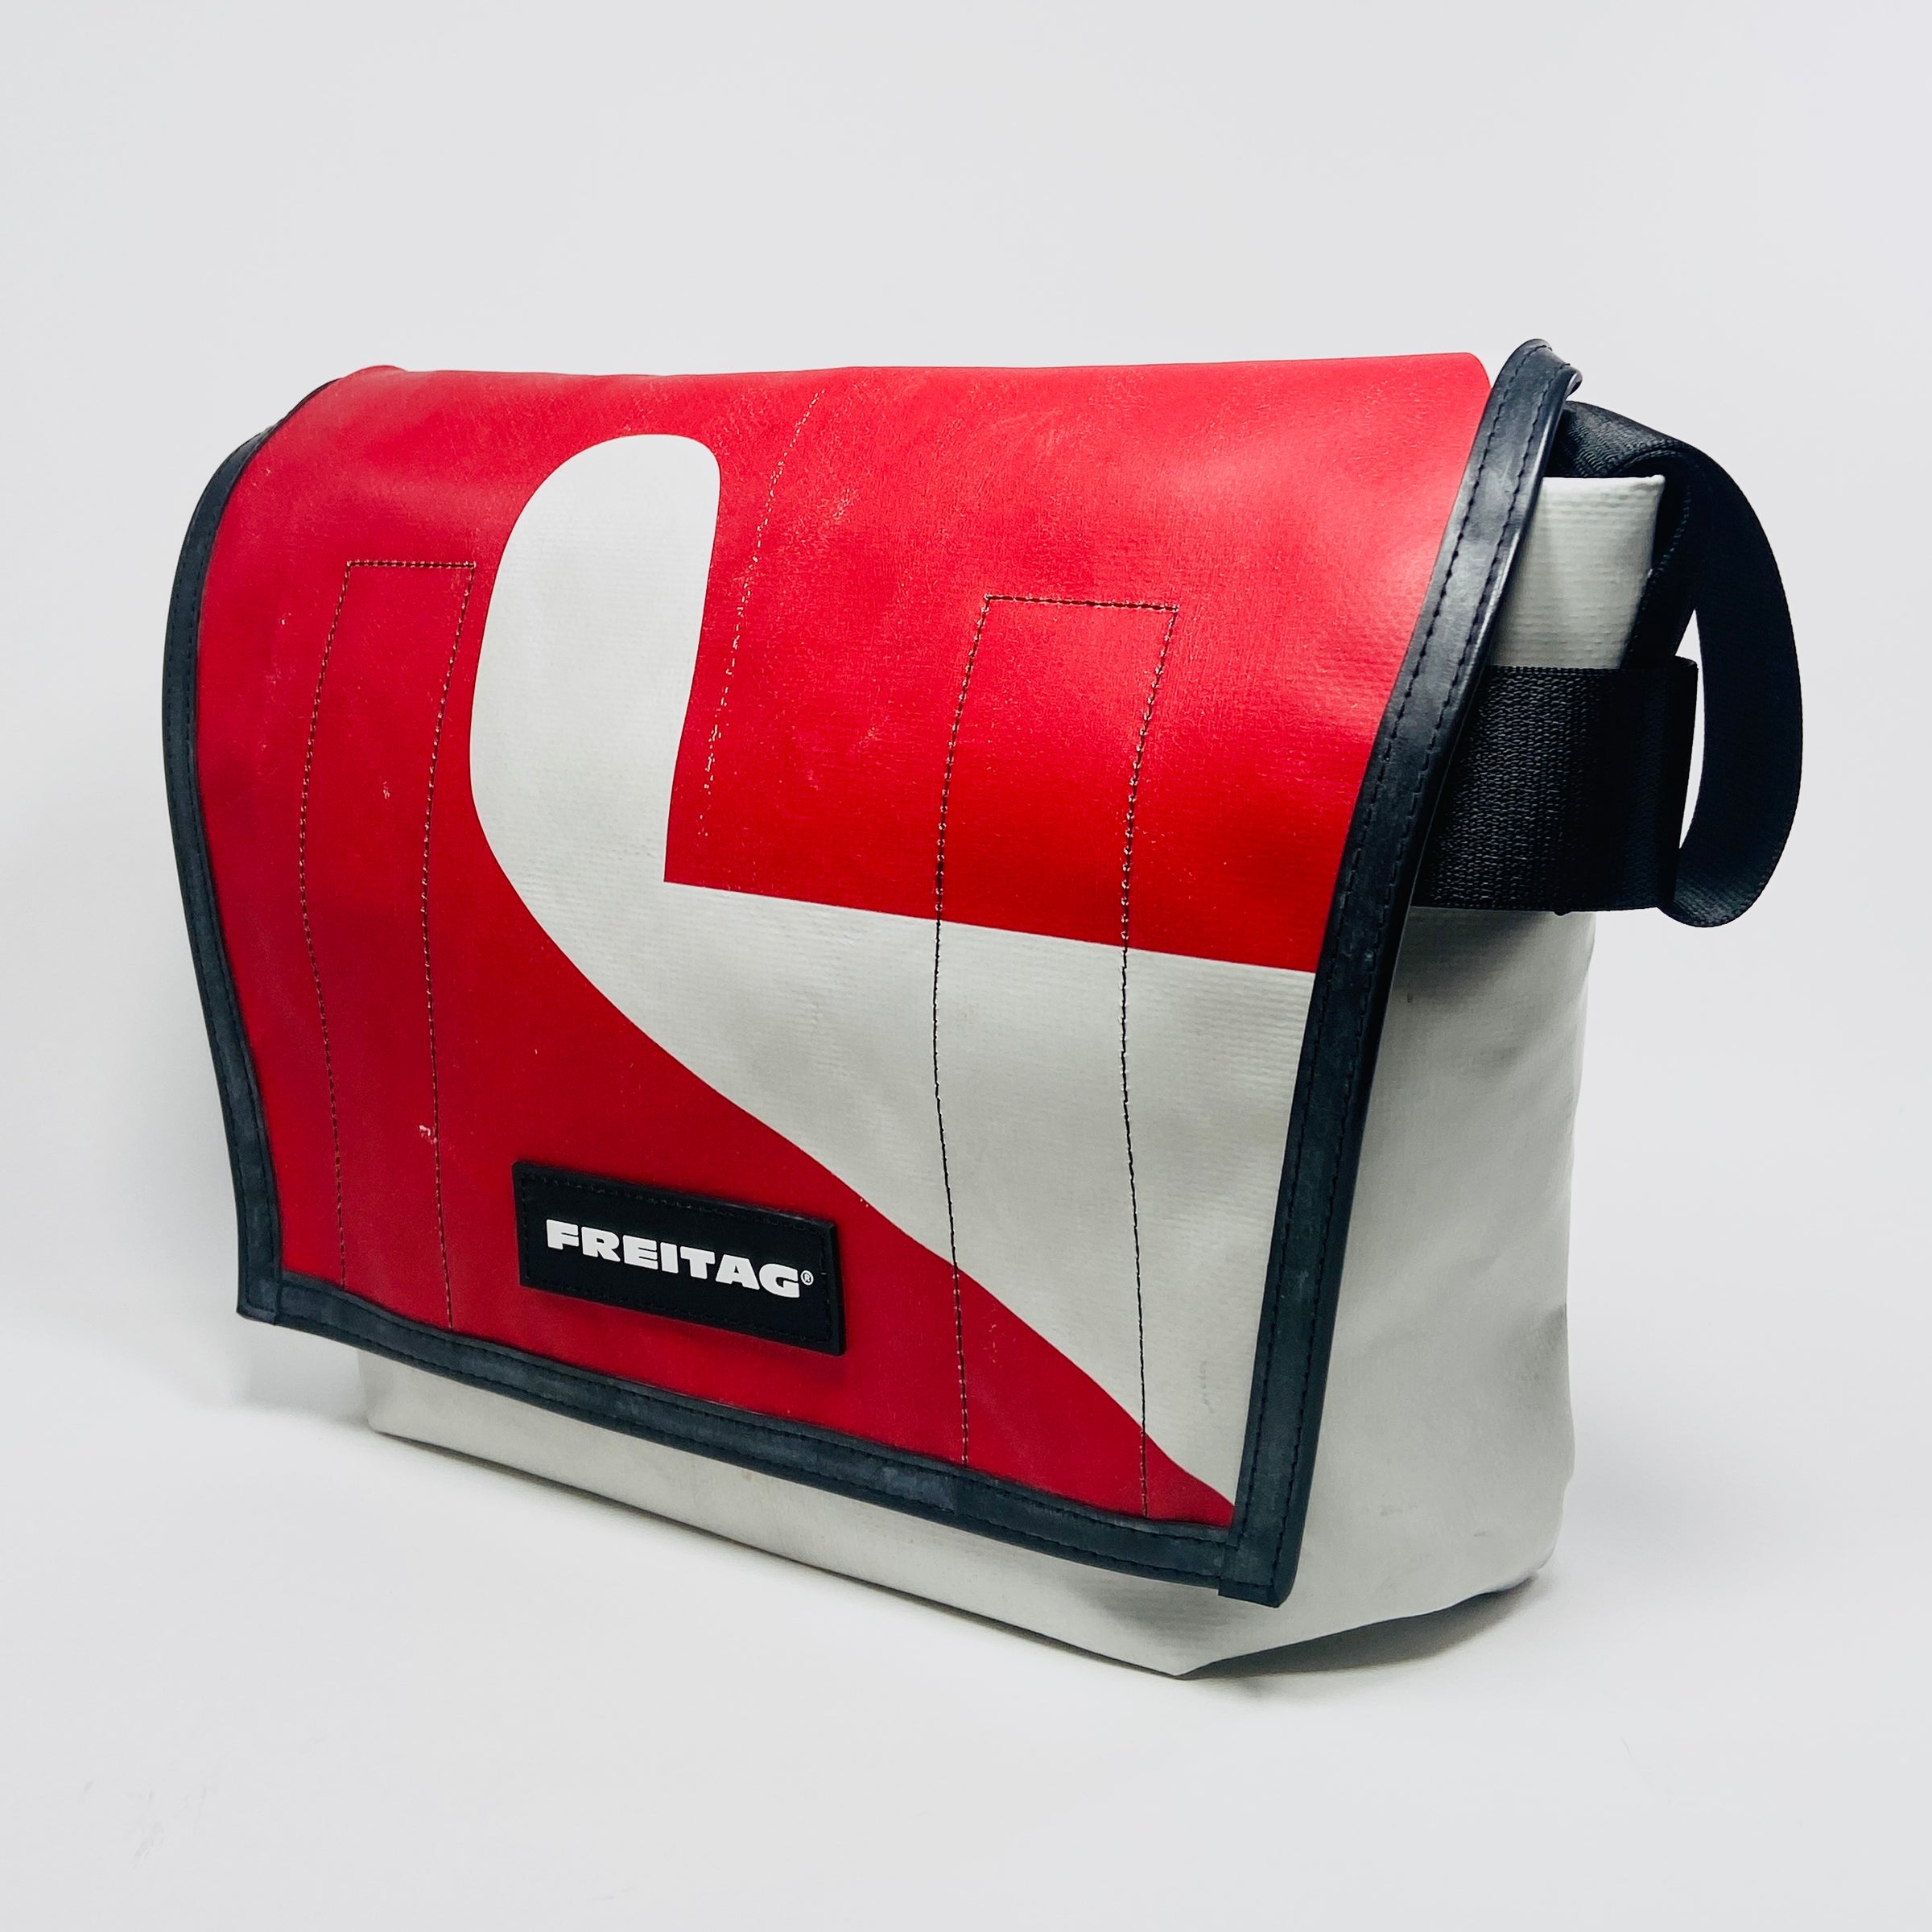 FREITAG F14 - Dexter - White and Red | UNITOM